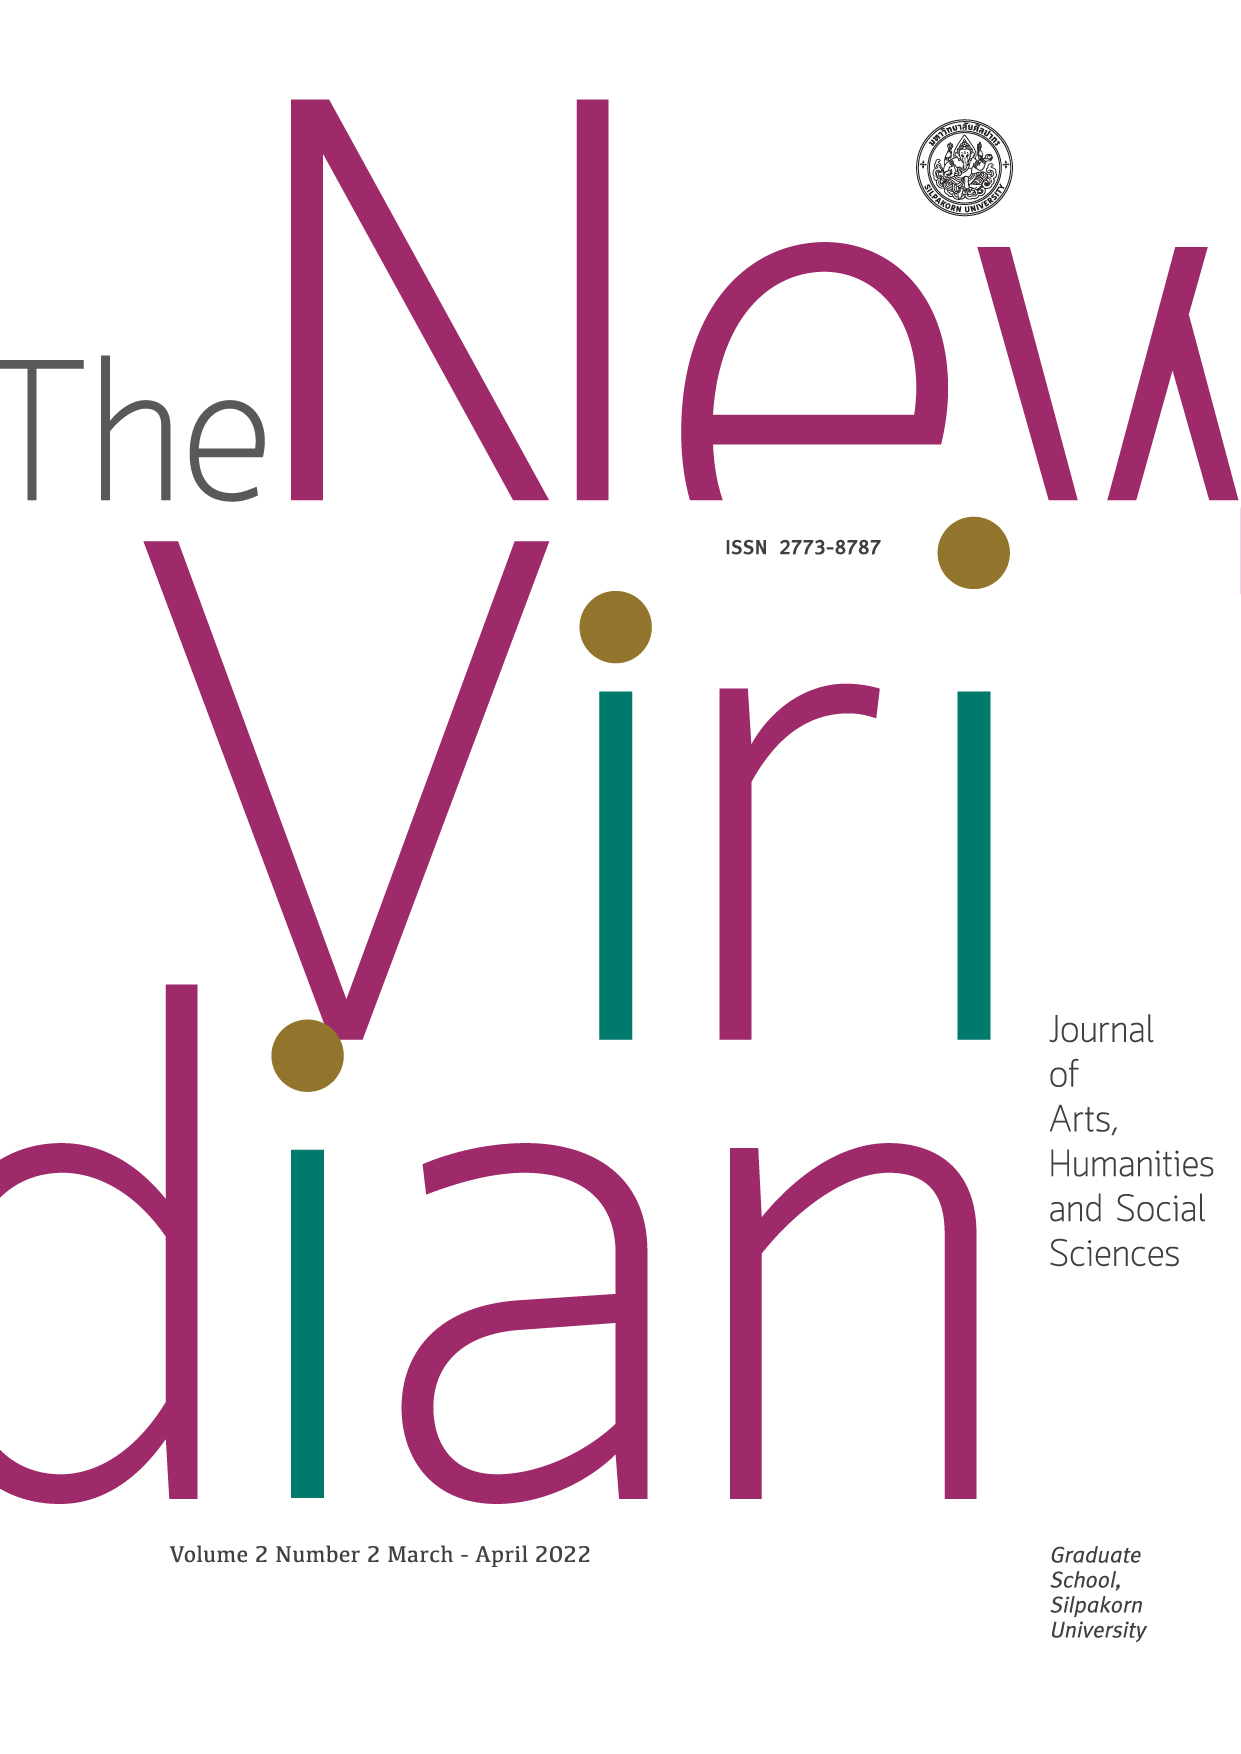 					View Vol. 2 No. 2 (2022): The New Viridian Journal of Arts, Humanities and Social Sciences ( March – April 2022)
				